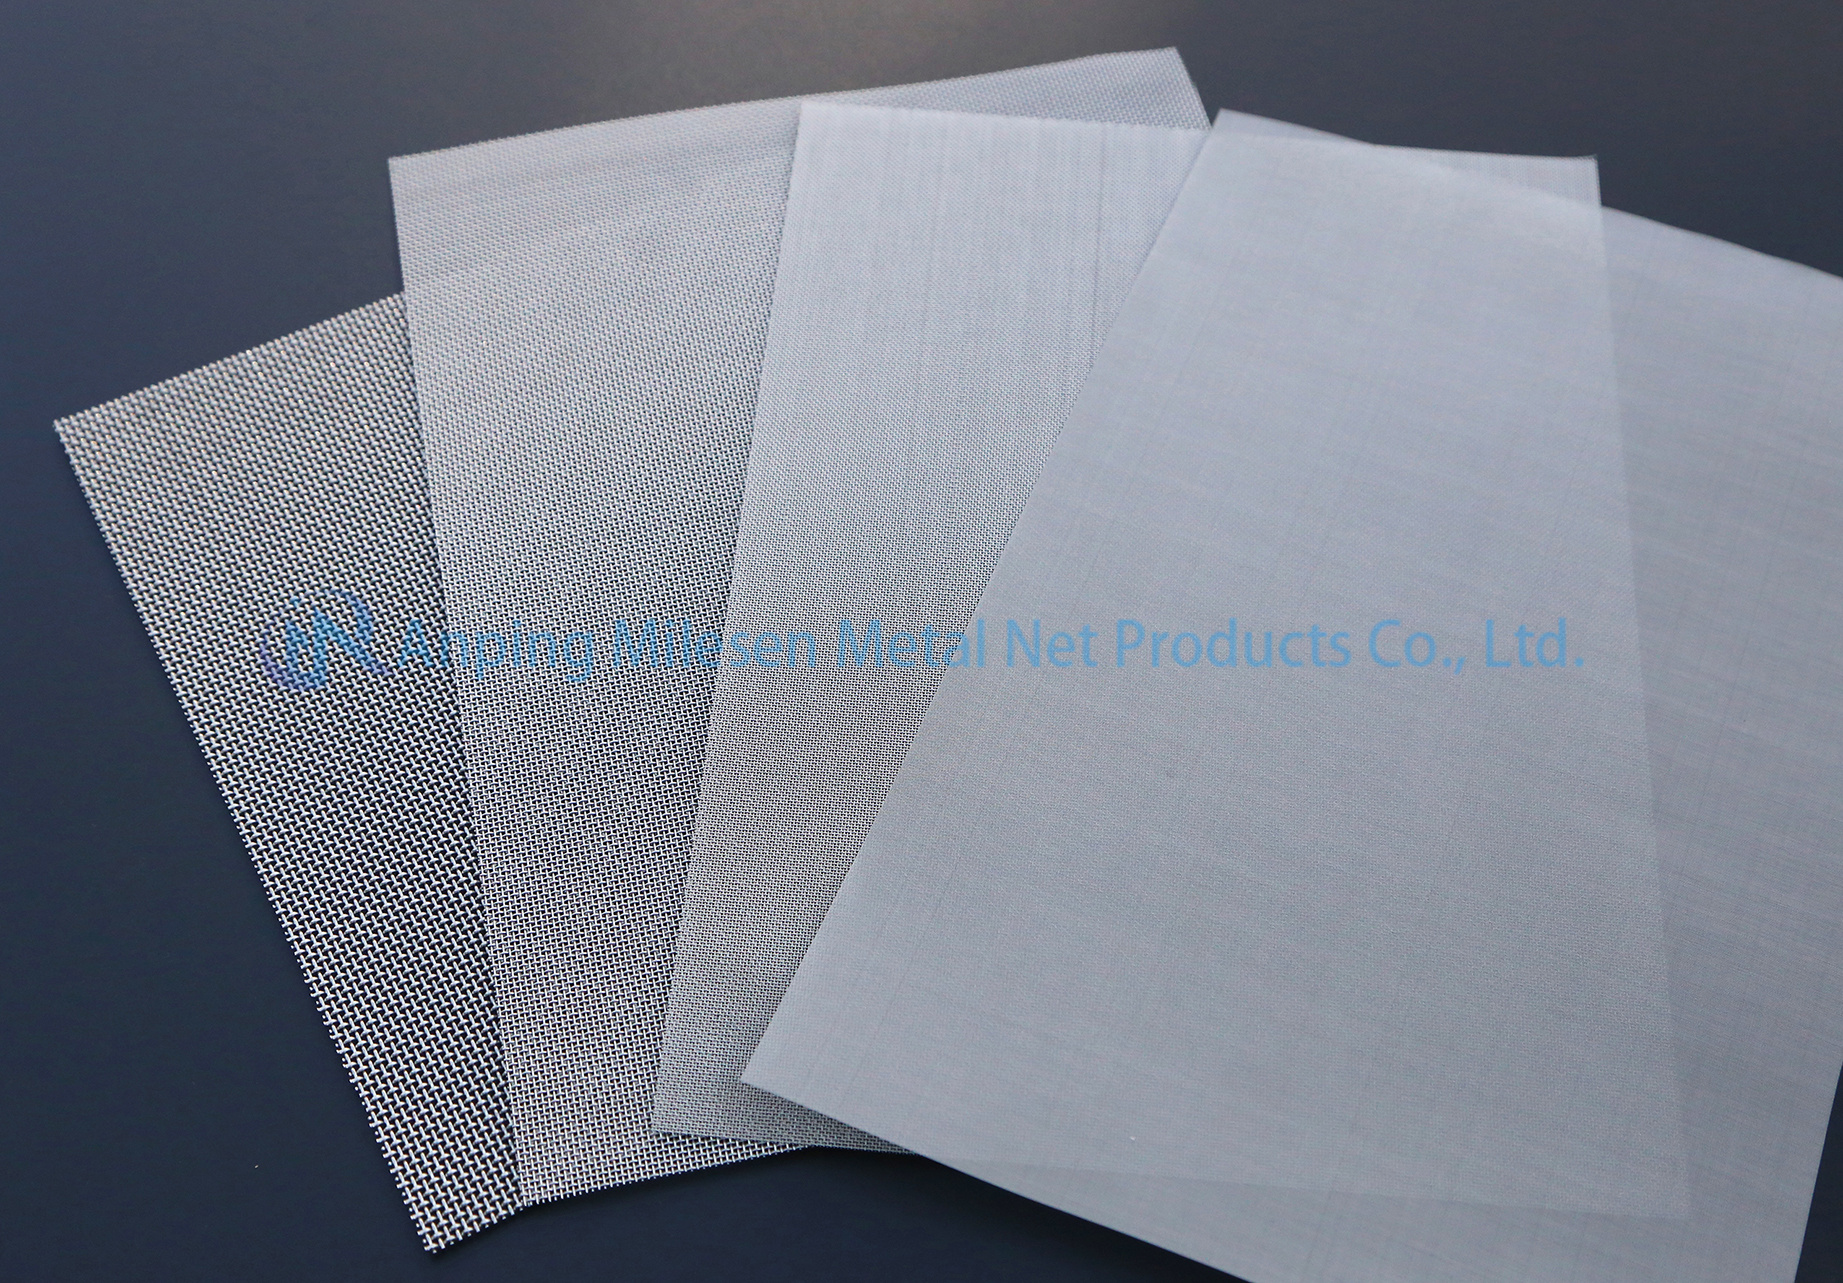 How to choose stainless steel wire mesh: